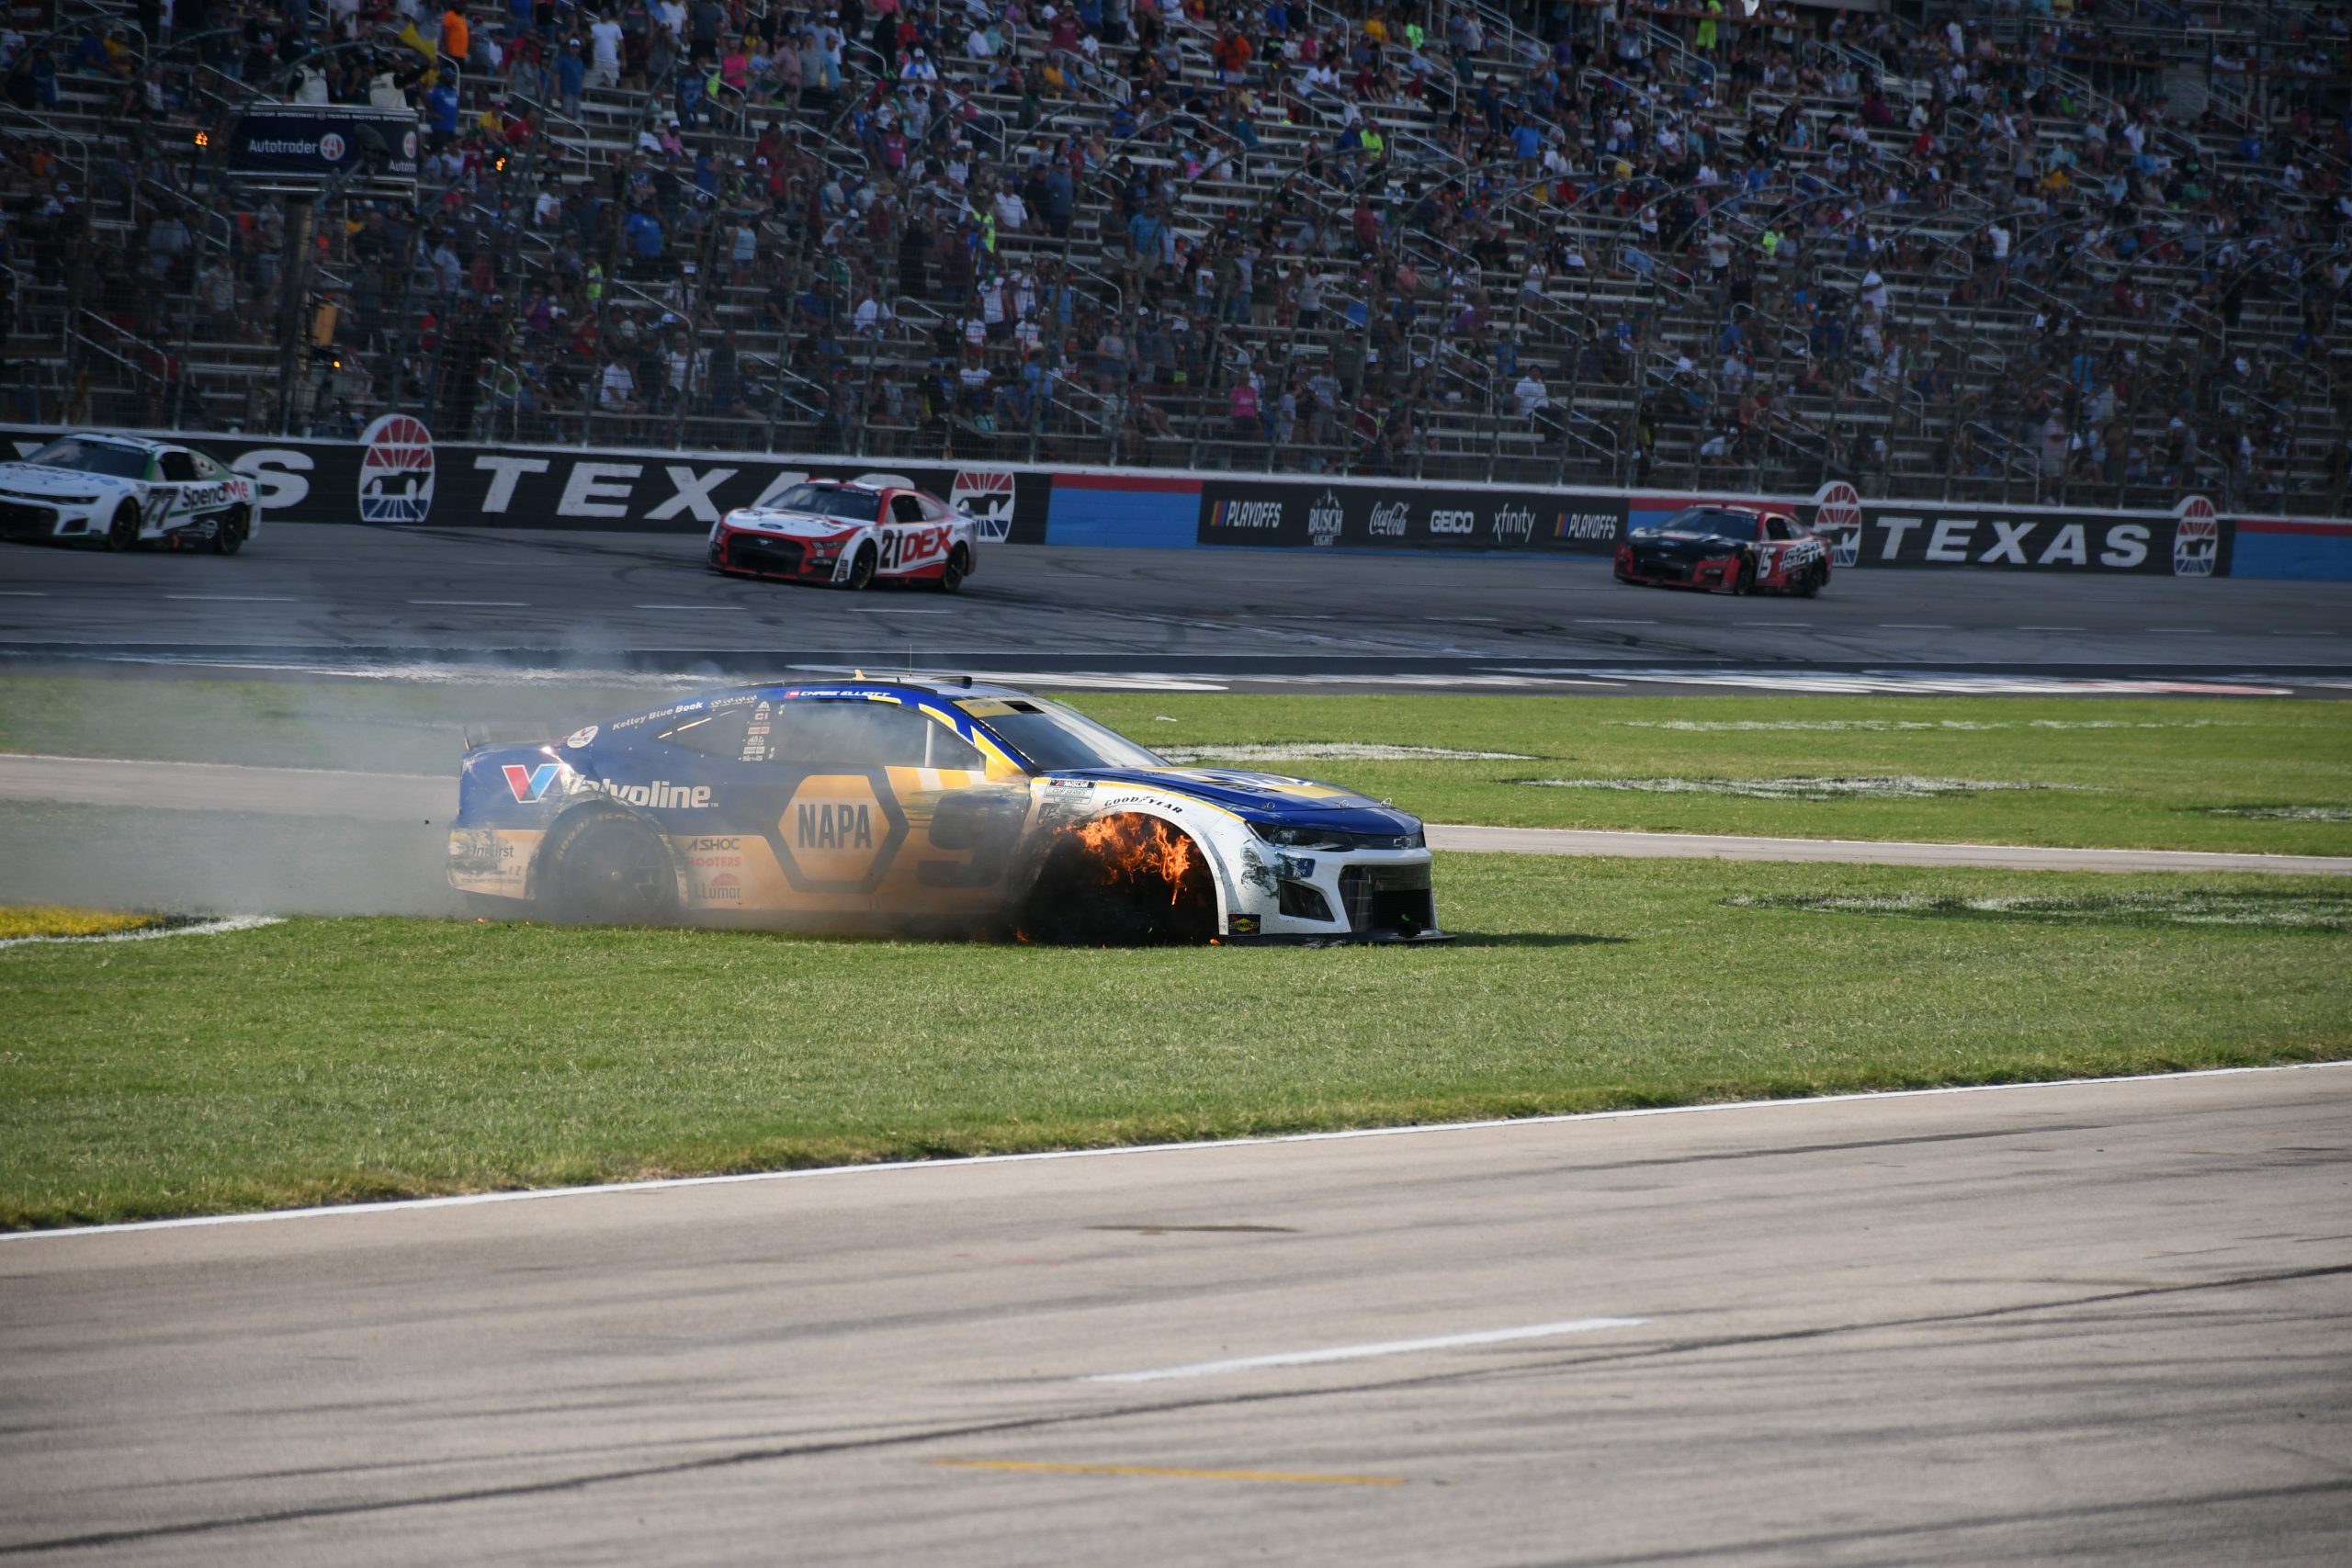 How can NASCAR improve upon the safety to not risk drivers like Chase Elliott at Texas? (Photo: John Arndt | r/NASCAR)